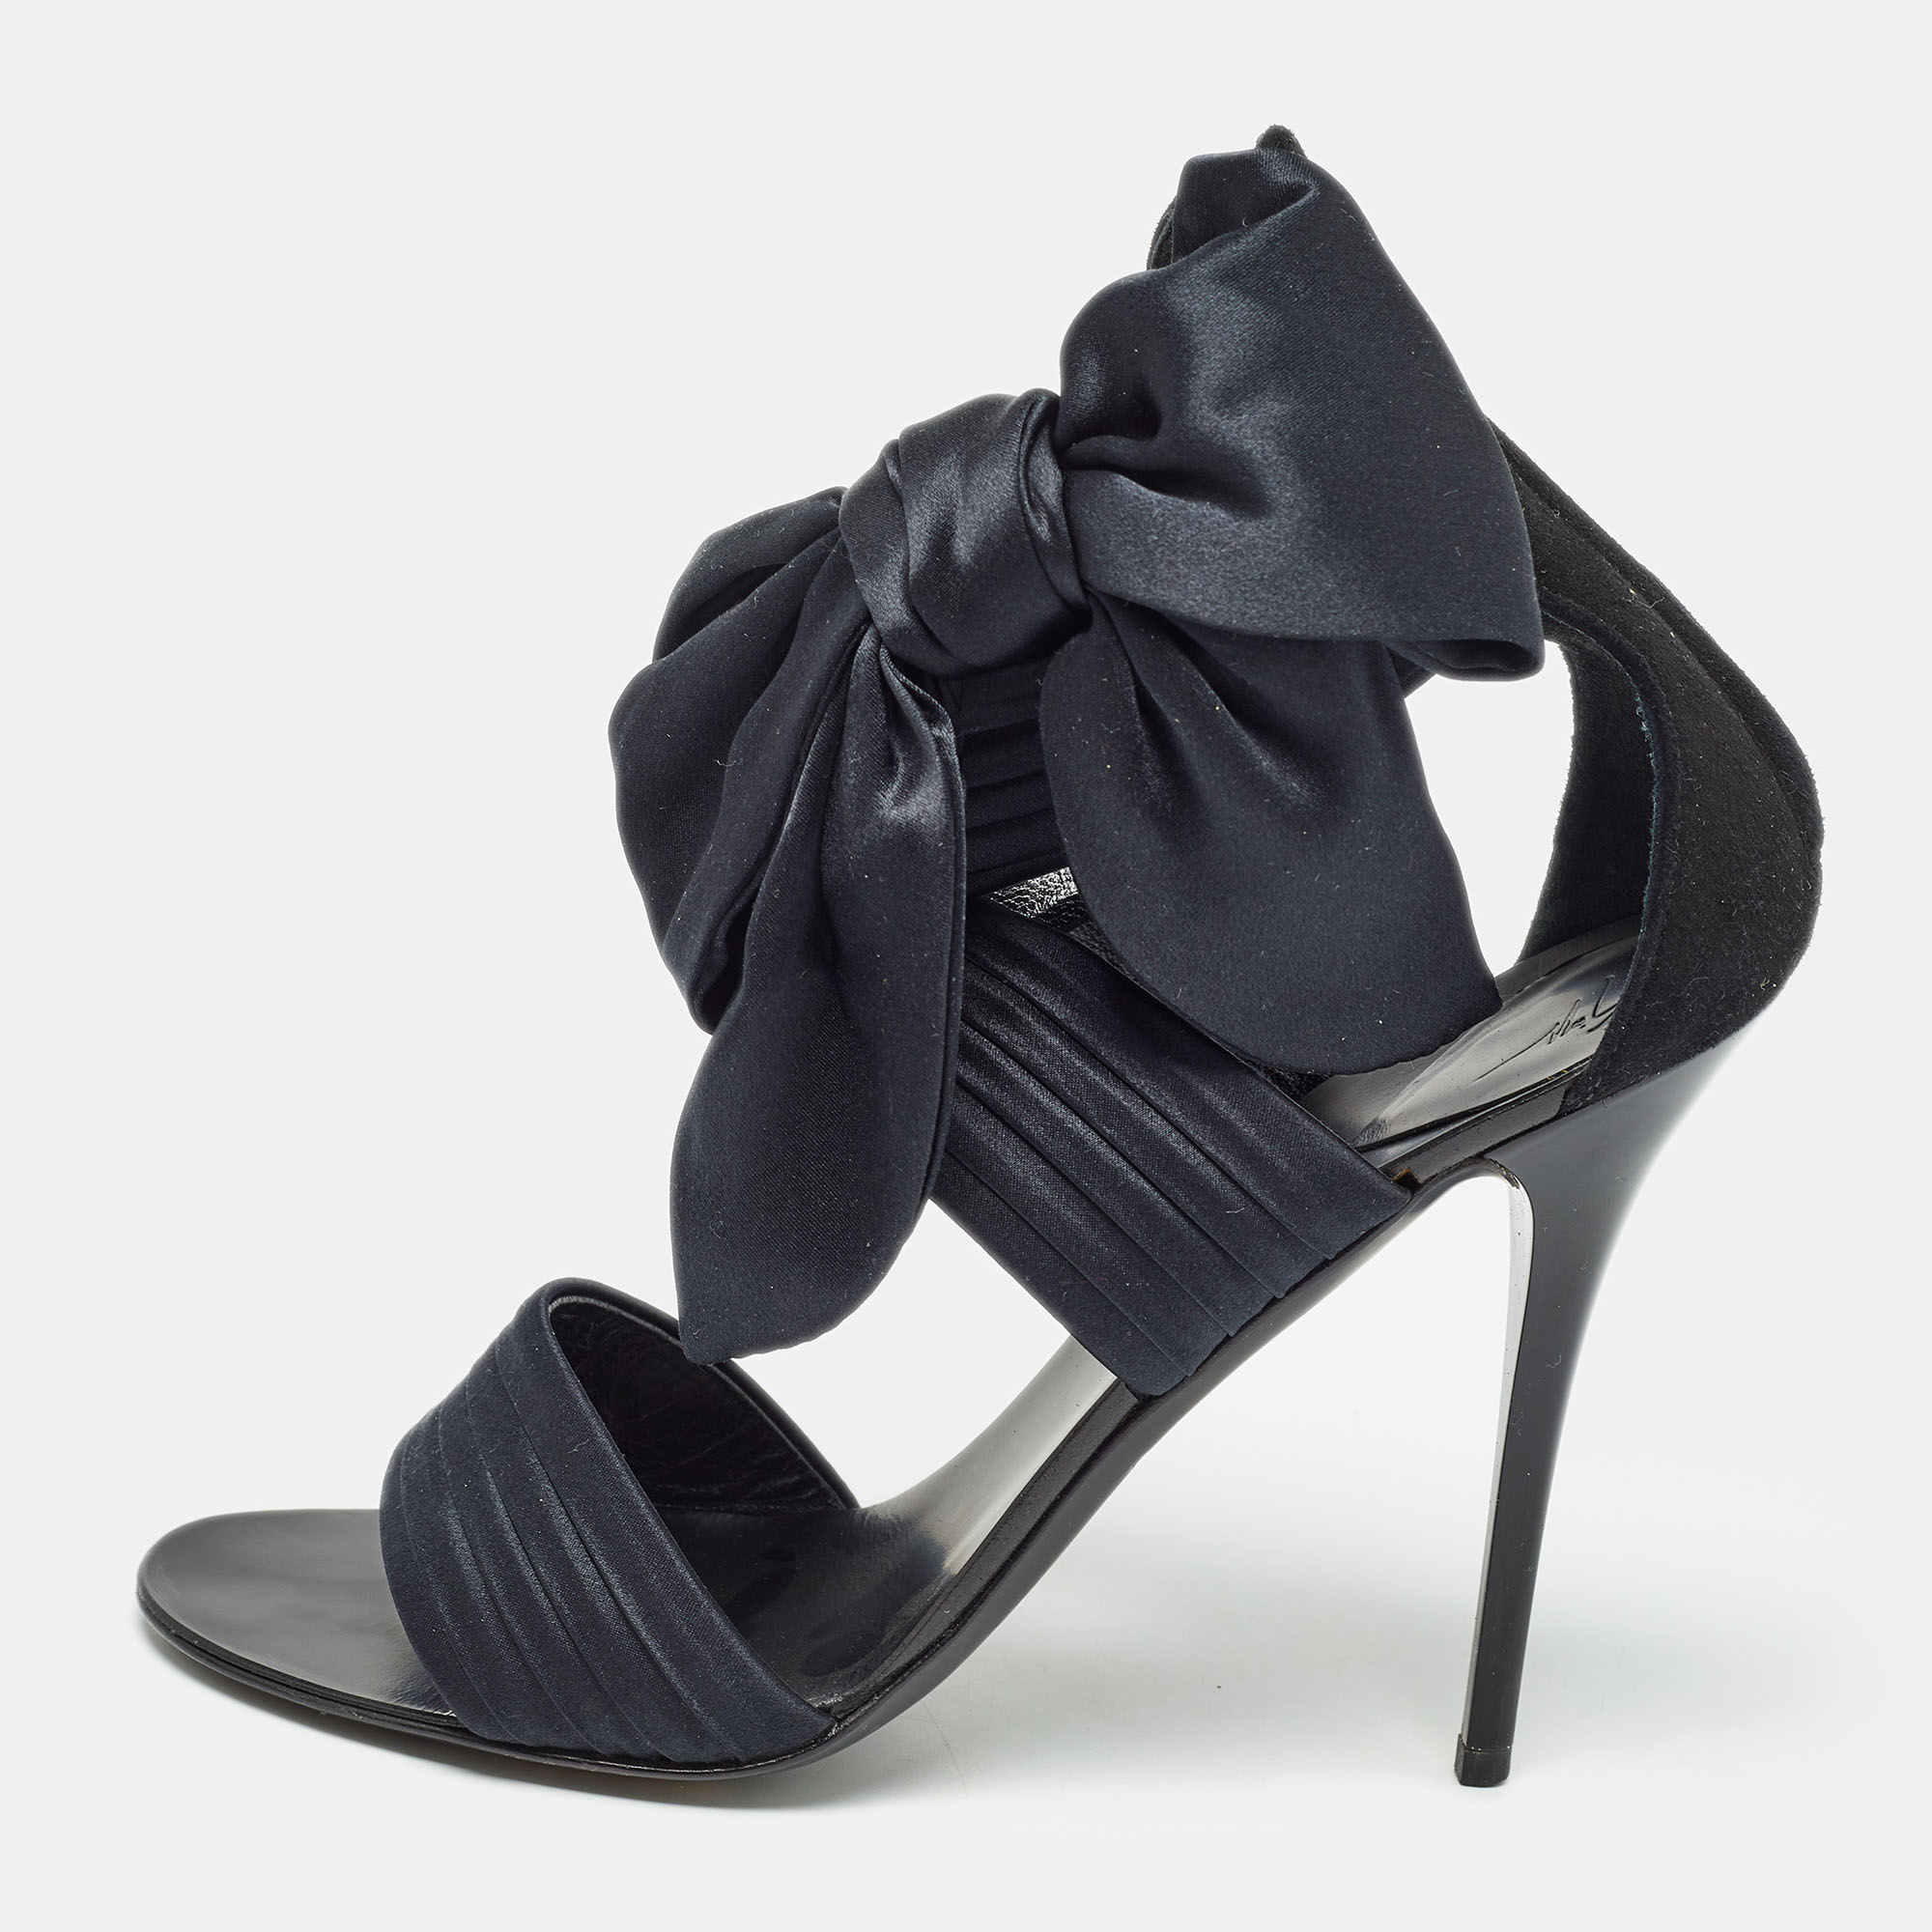 Giuseppe zanotti black satin and suede ankle strap sandals size 37